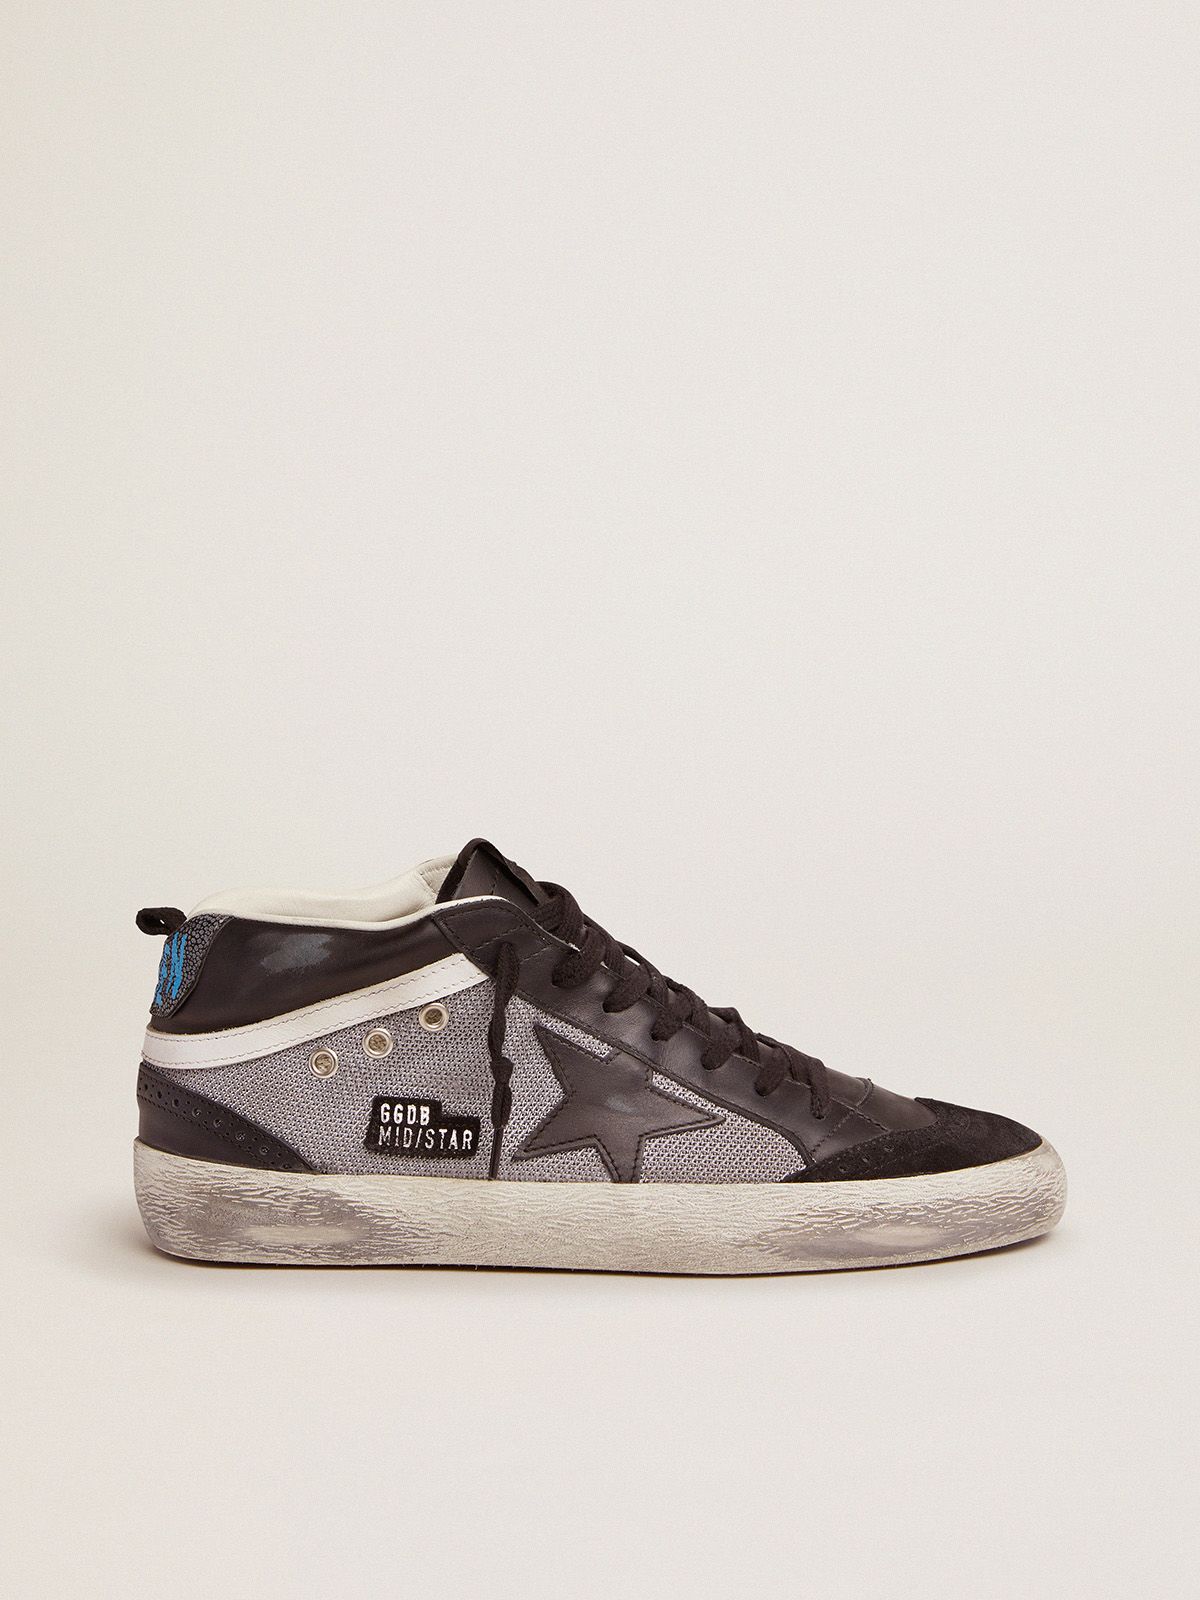 Mid Star sneakers in black leather and silver mesh